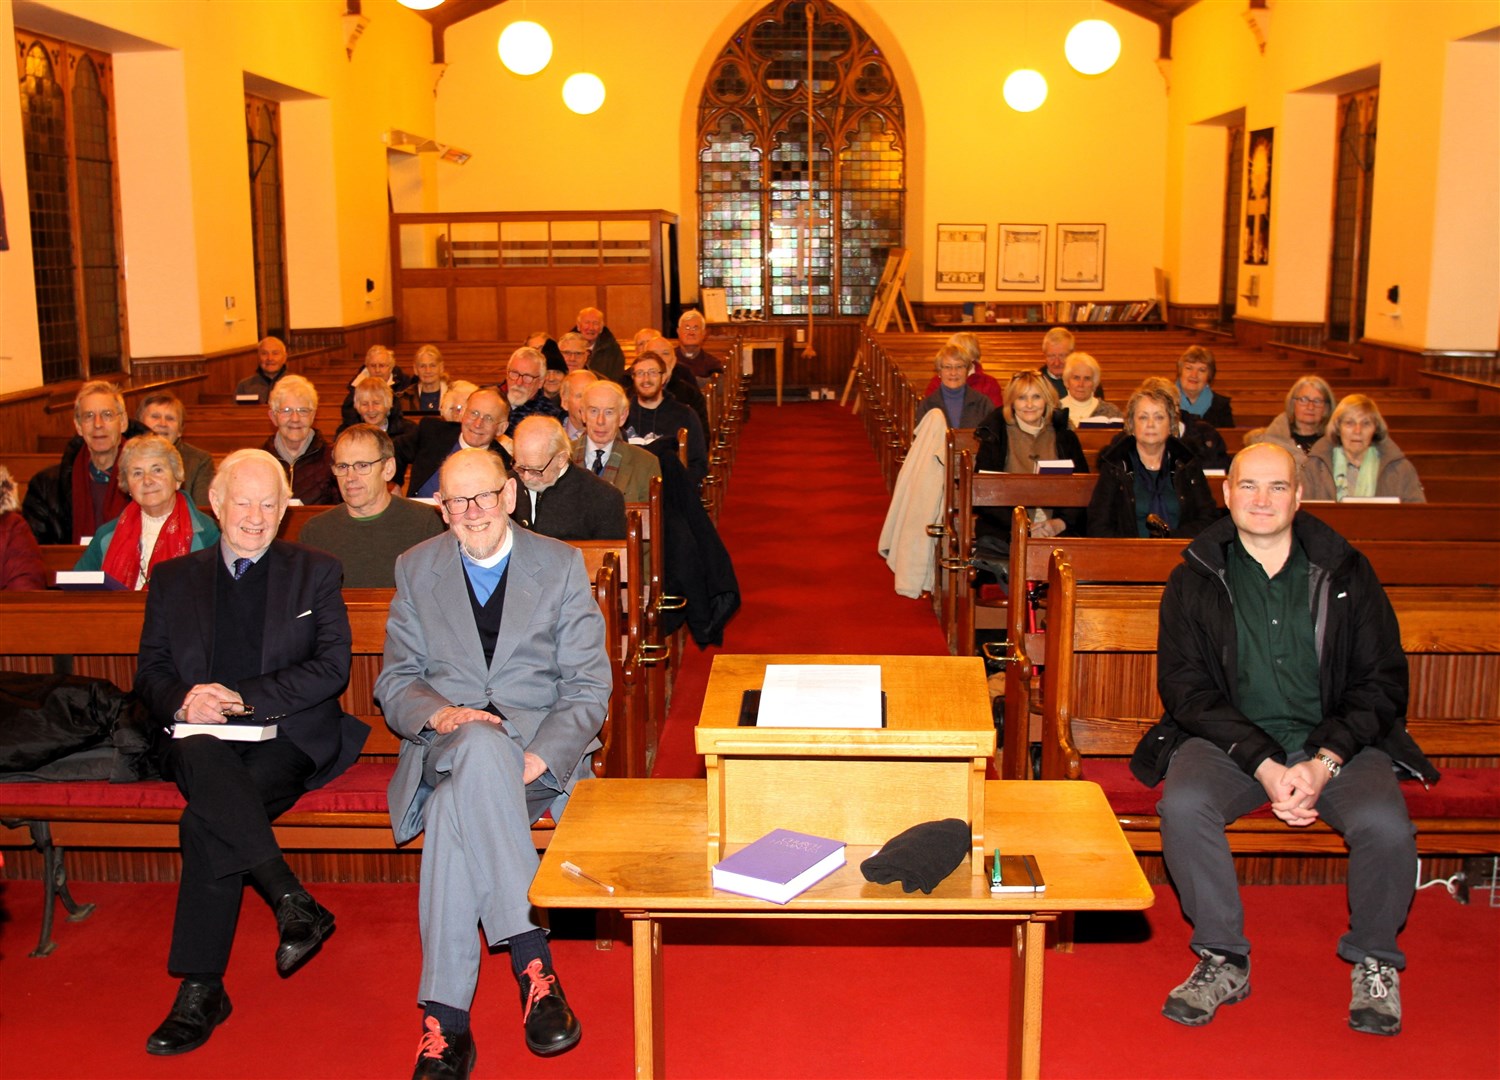 Present members of the Presbytery of Abernethy including the Moderator Rev Graham Atkinson (front right) clerk Rev Jim MacEwan (front, second left) along with former members who were invited to the final meeting before merging with others.